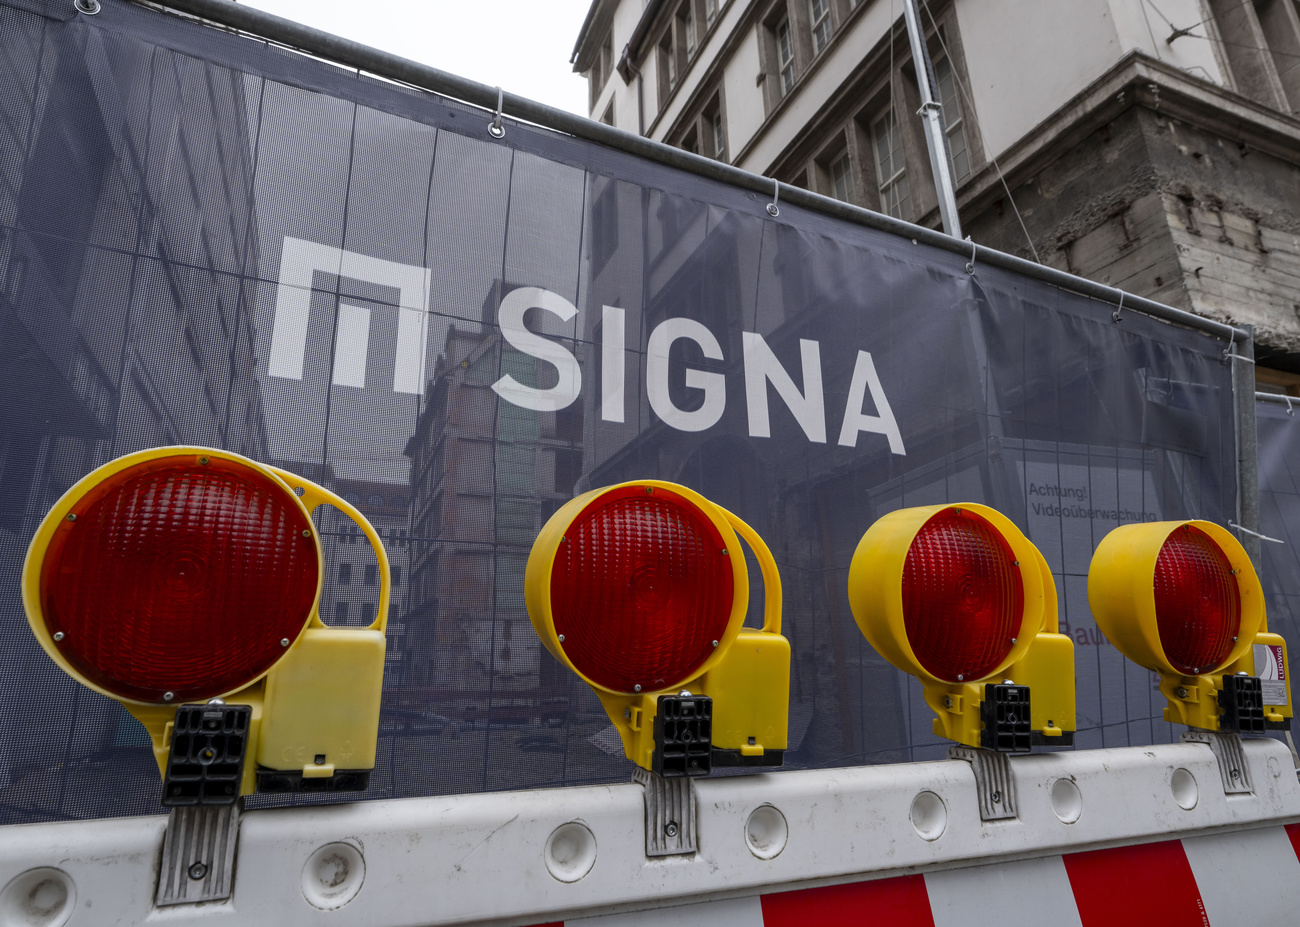 Signa sign surrounded by red lights